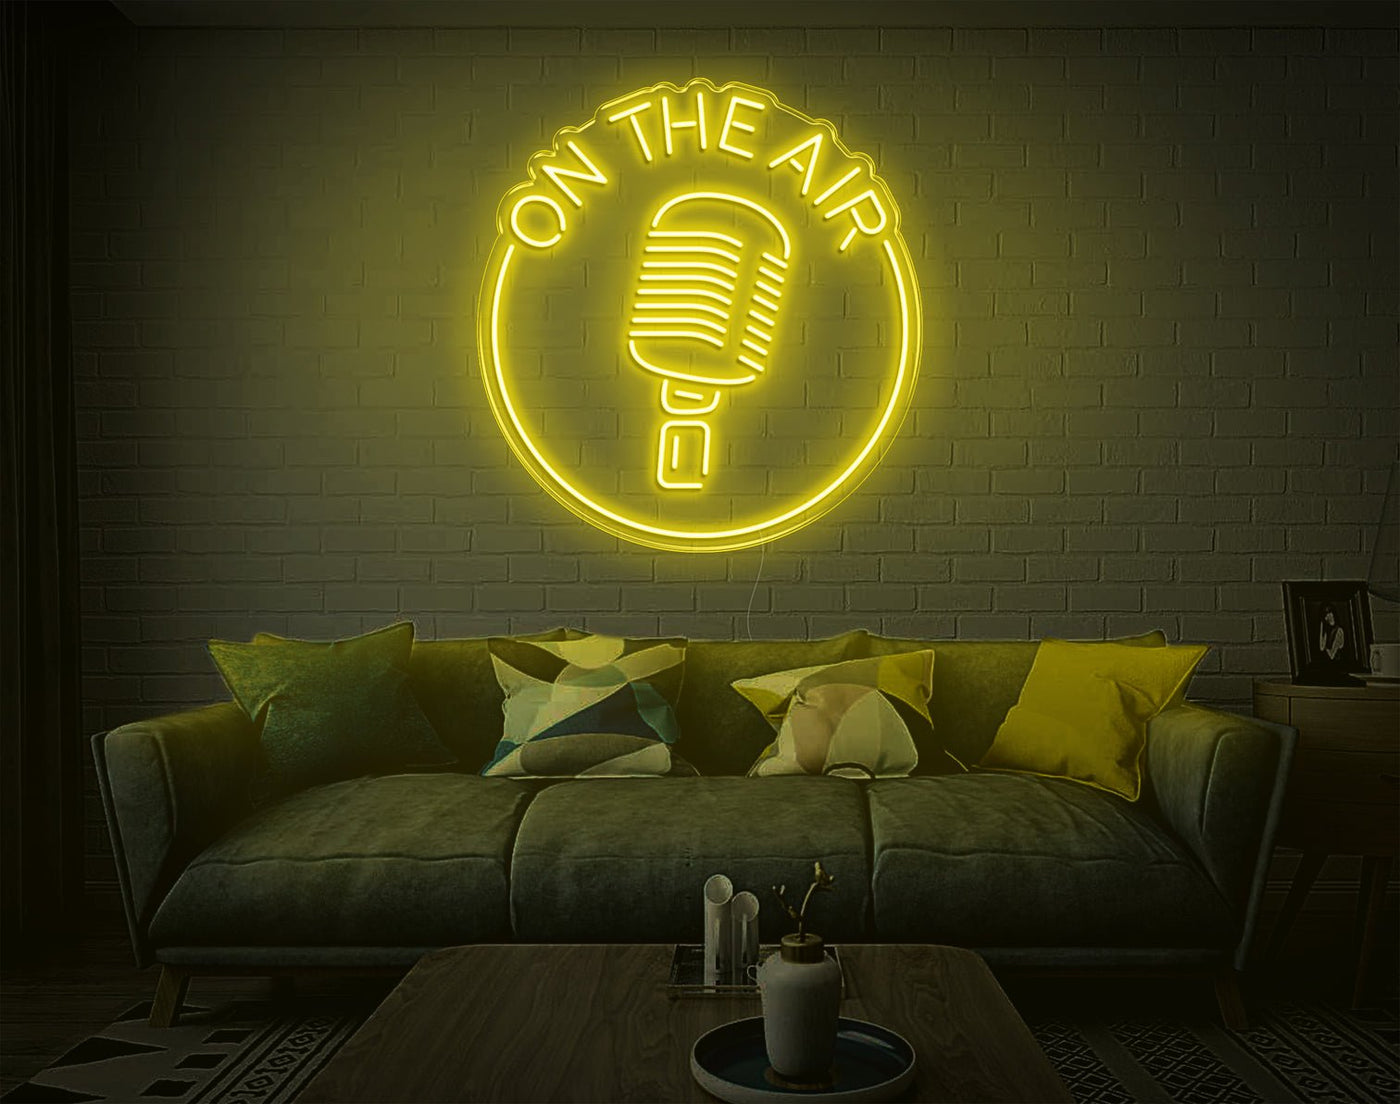 On The Air LED Neon Sign - 27inch x 26inchYellow